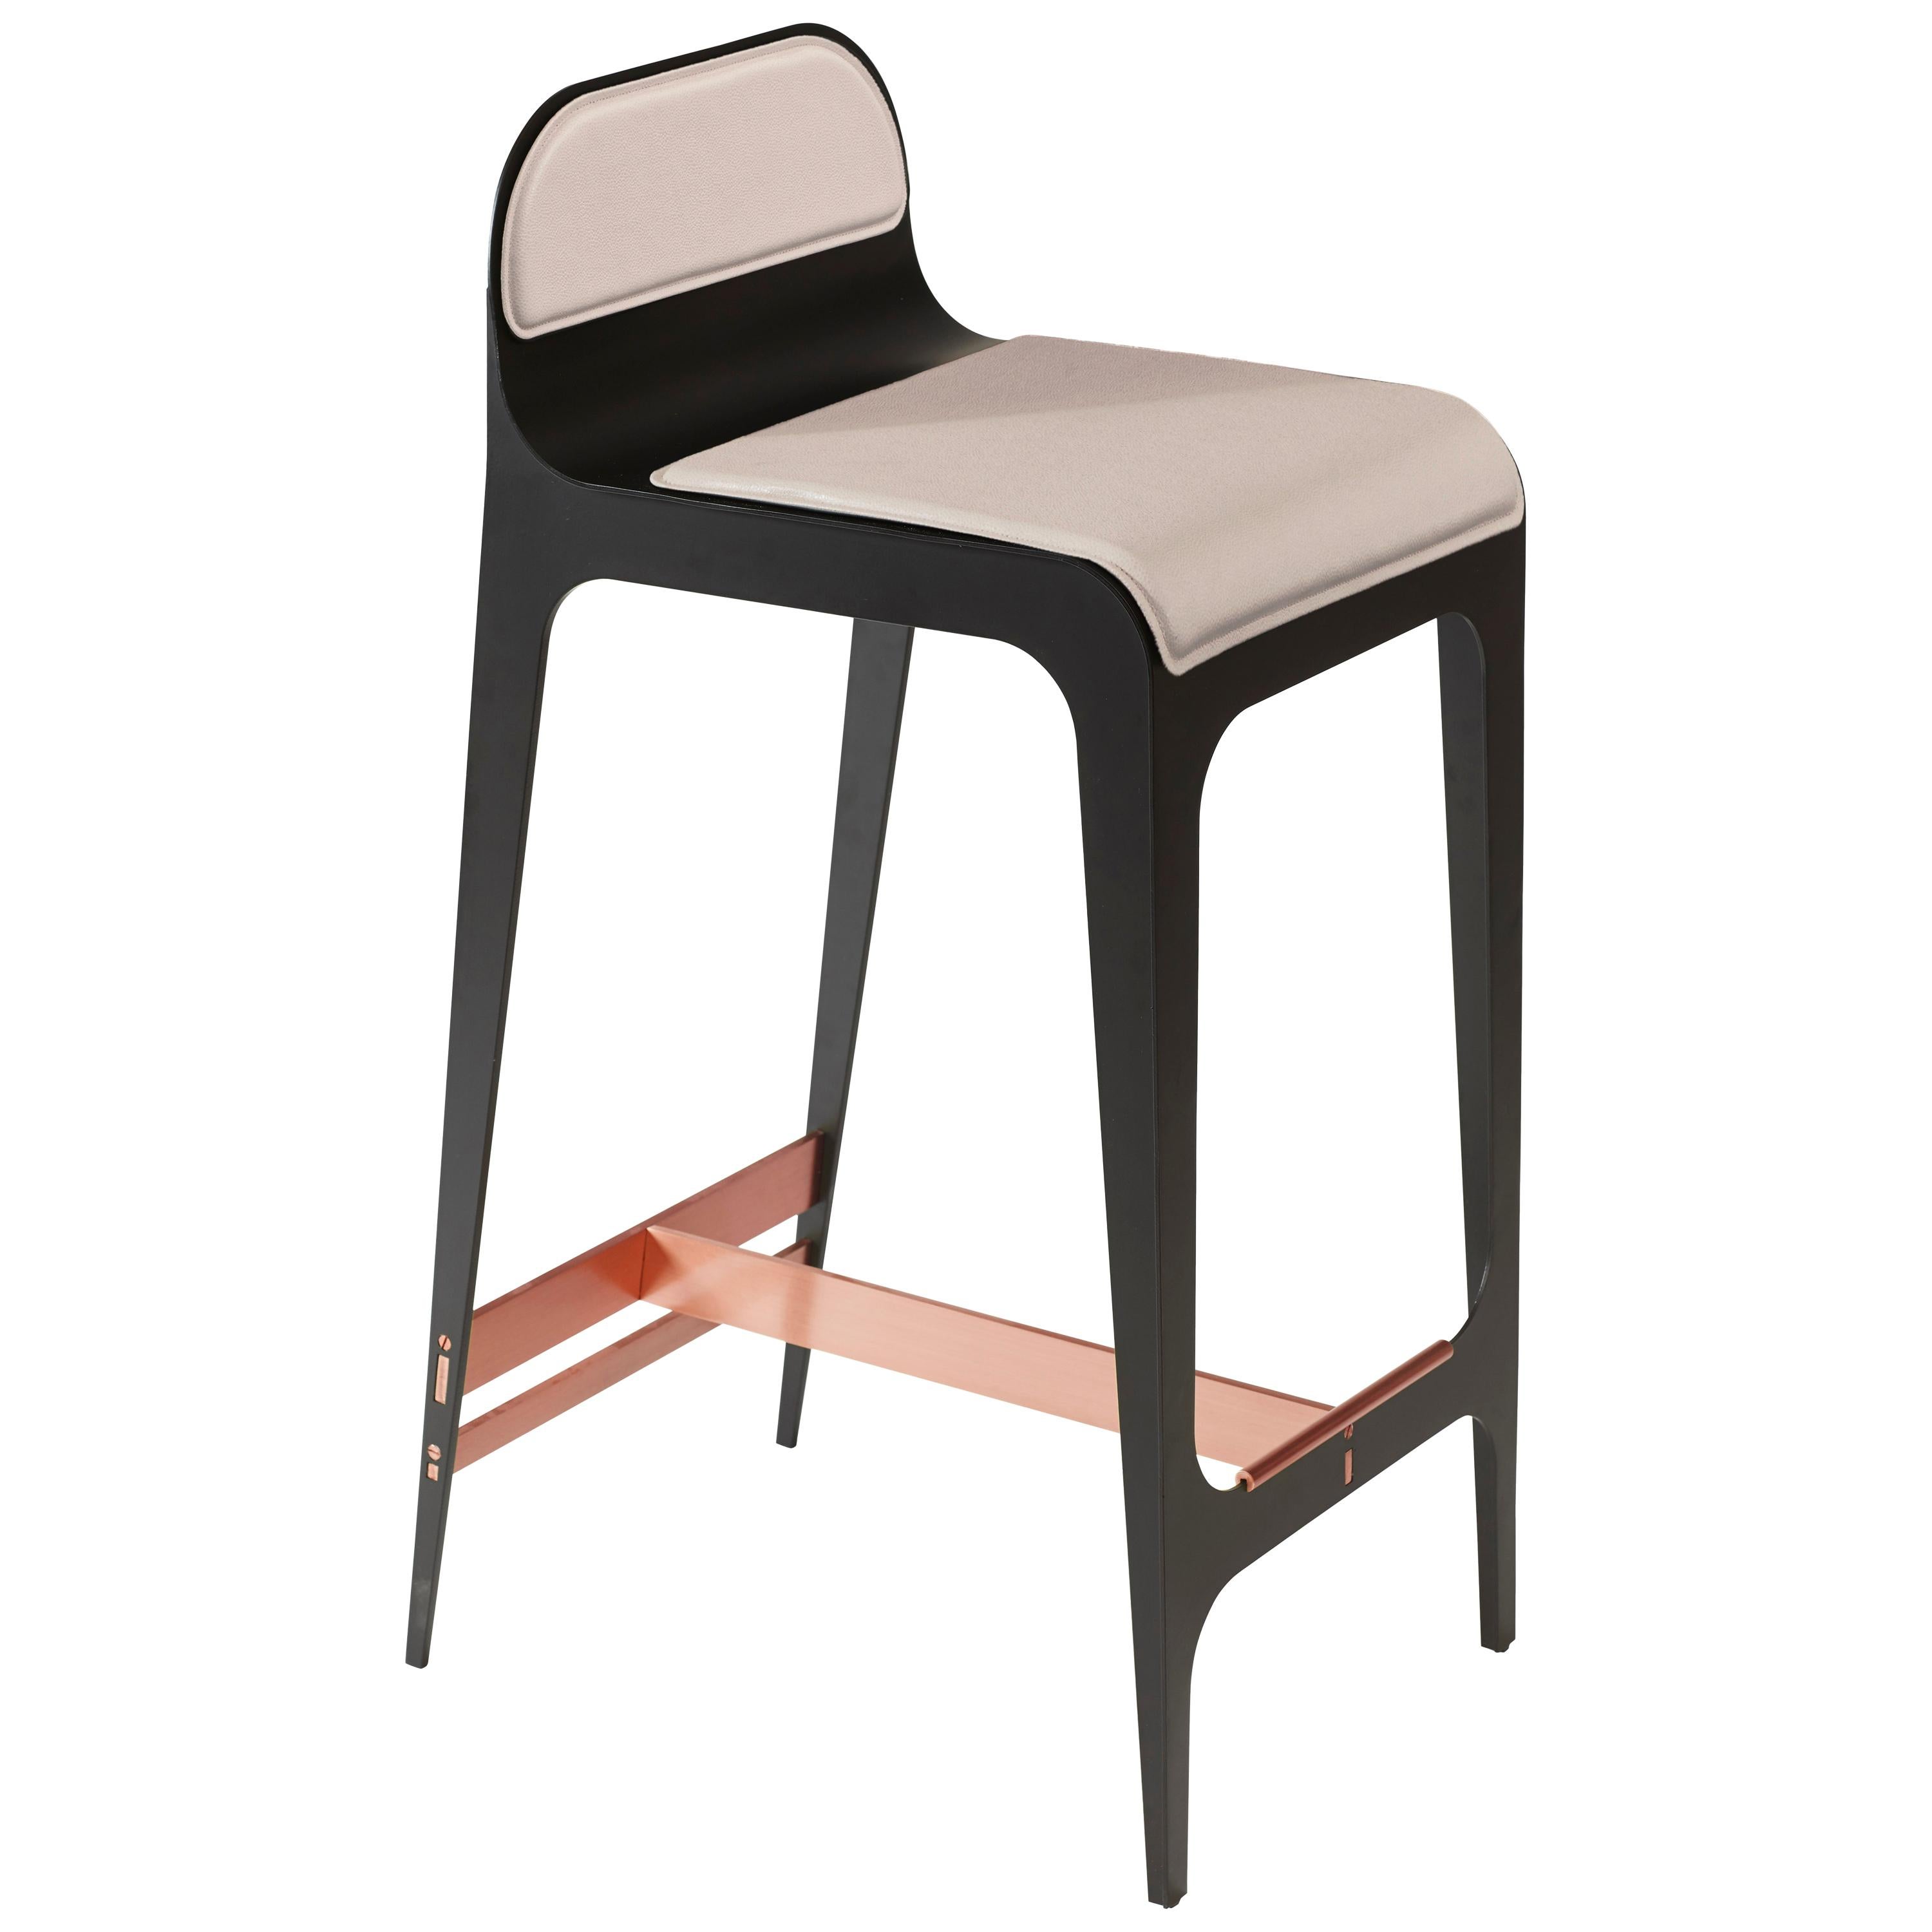 Pink (Nude Pink) Bardot Barstool with Leather Seat and Satin Copper Hardware by Gabriel Scott